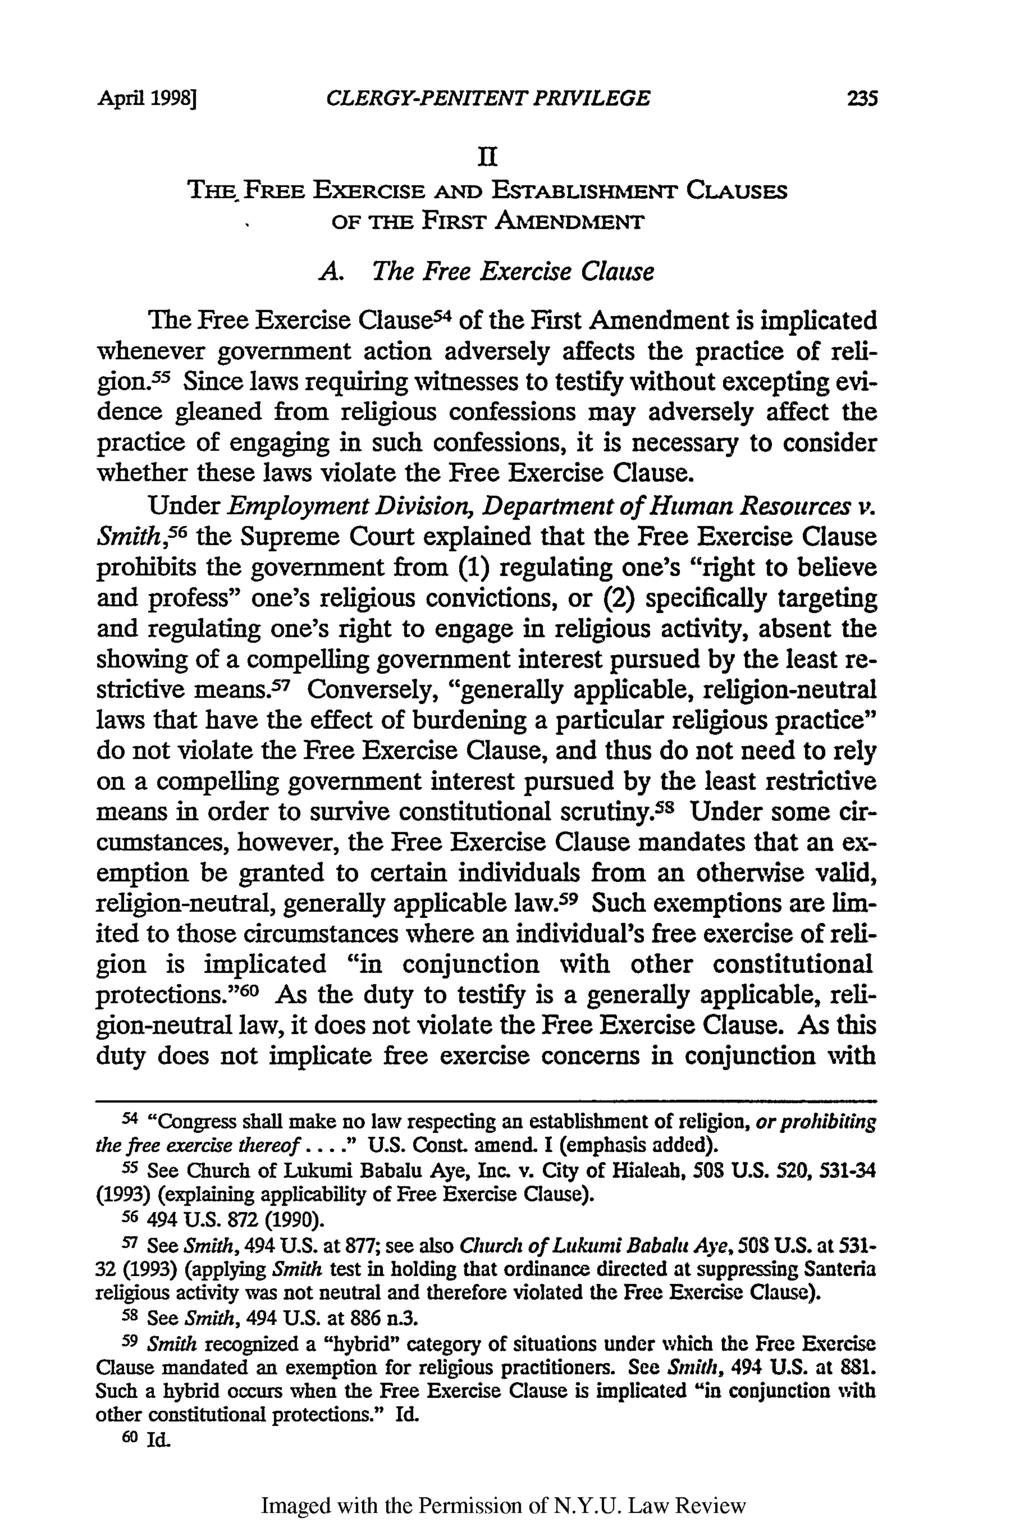 April 1998] CLERGY-PENITENT PRIVILEGE 11 THEm FRE EXERCISE AND ESTABLISHMENT CLAUSES OF THE FIRST AMENDmNT A.